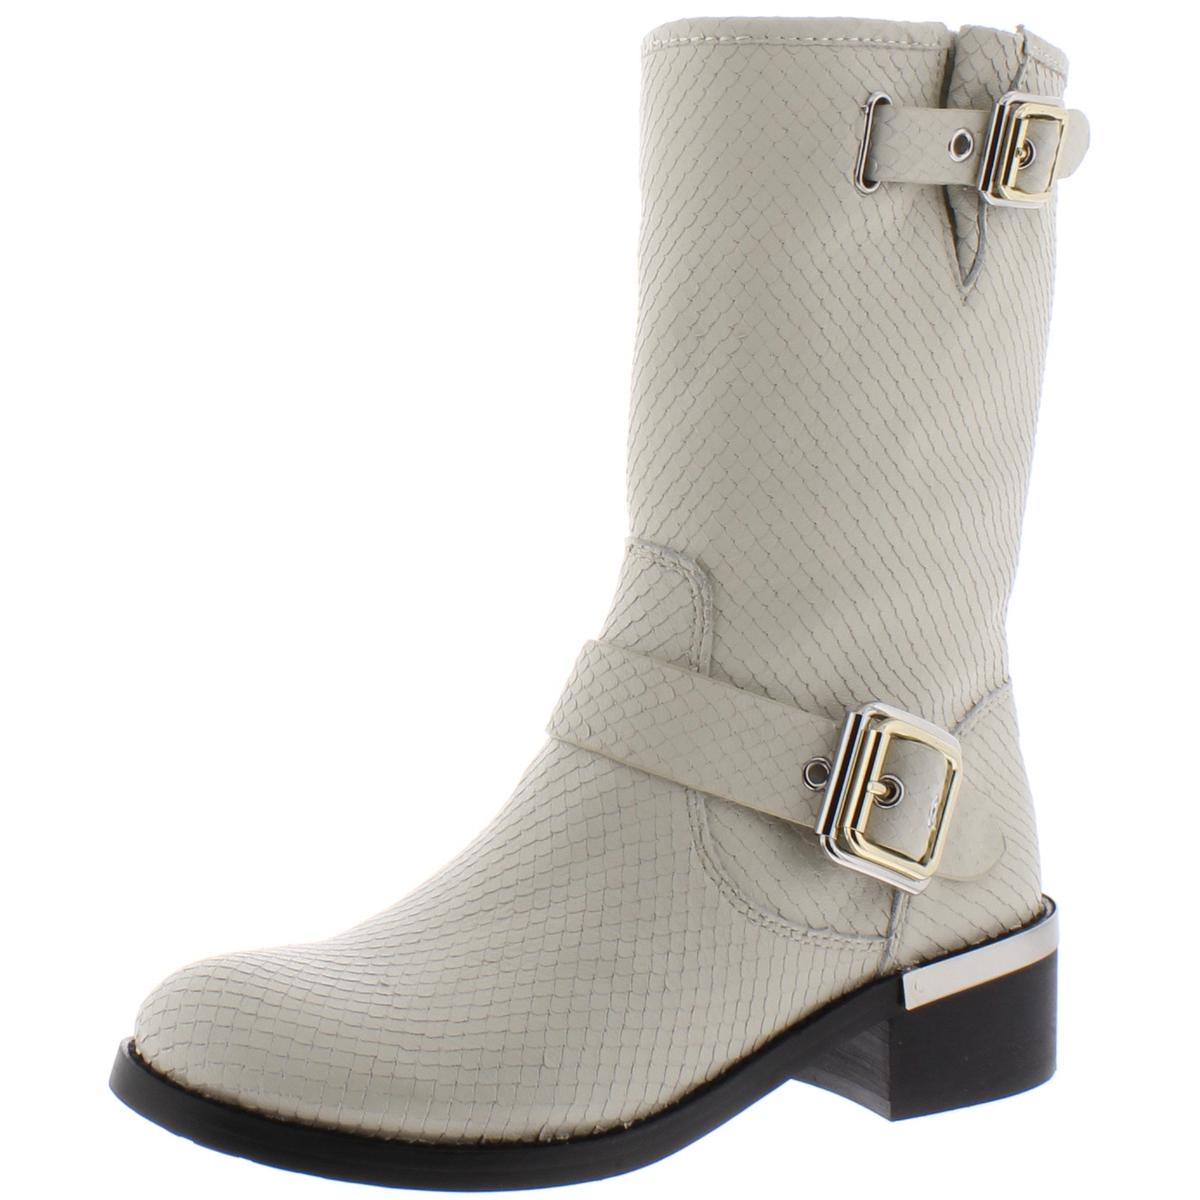 Vince Camuto Womens Windy Buckle Moto Fashion MidCalf